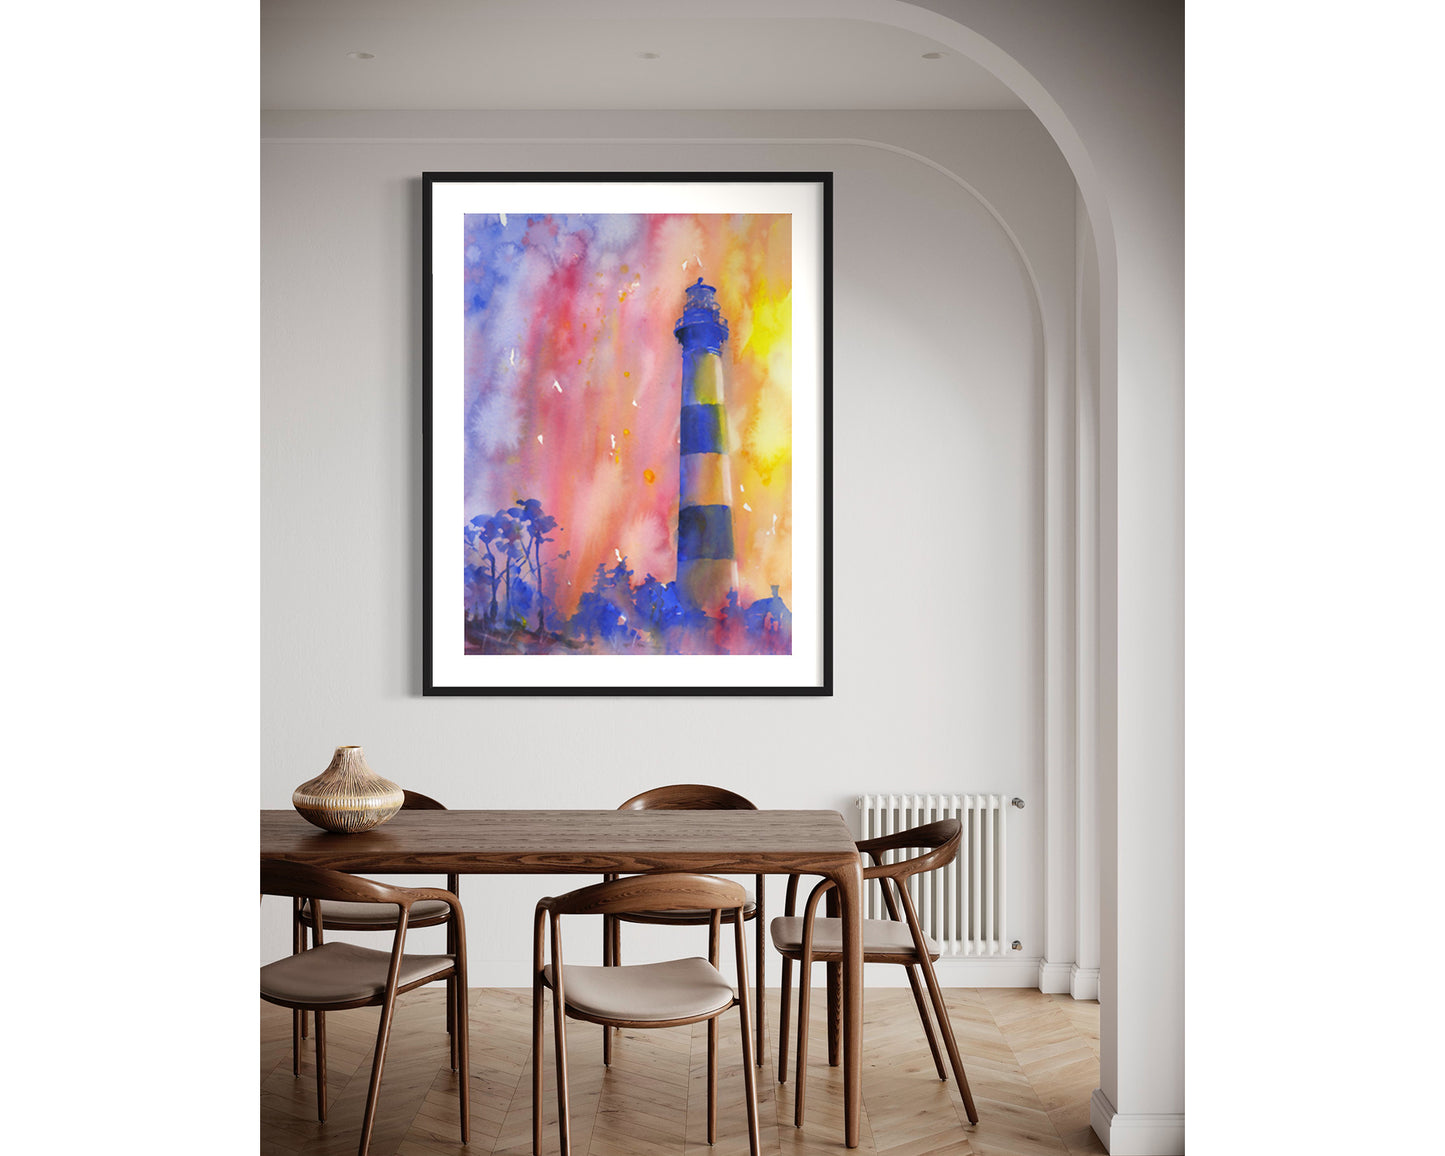 Bodie Island lighthouse at sunset in Outer Banks (OBX) of North Carolina- USA, Lighhtouse watercolor landscape fine art Bodie Island (print)